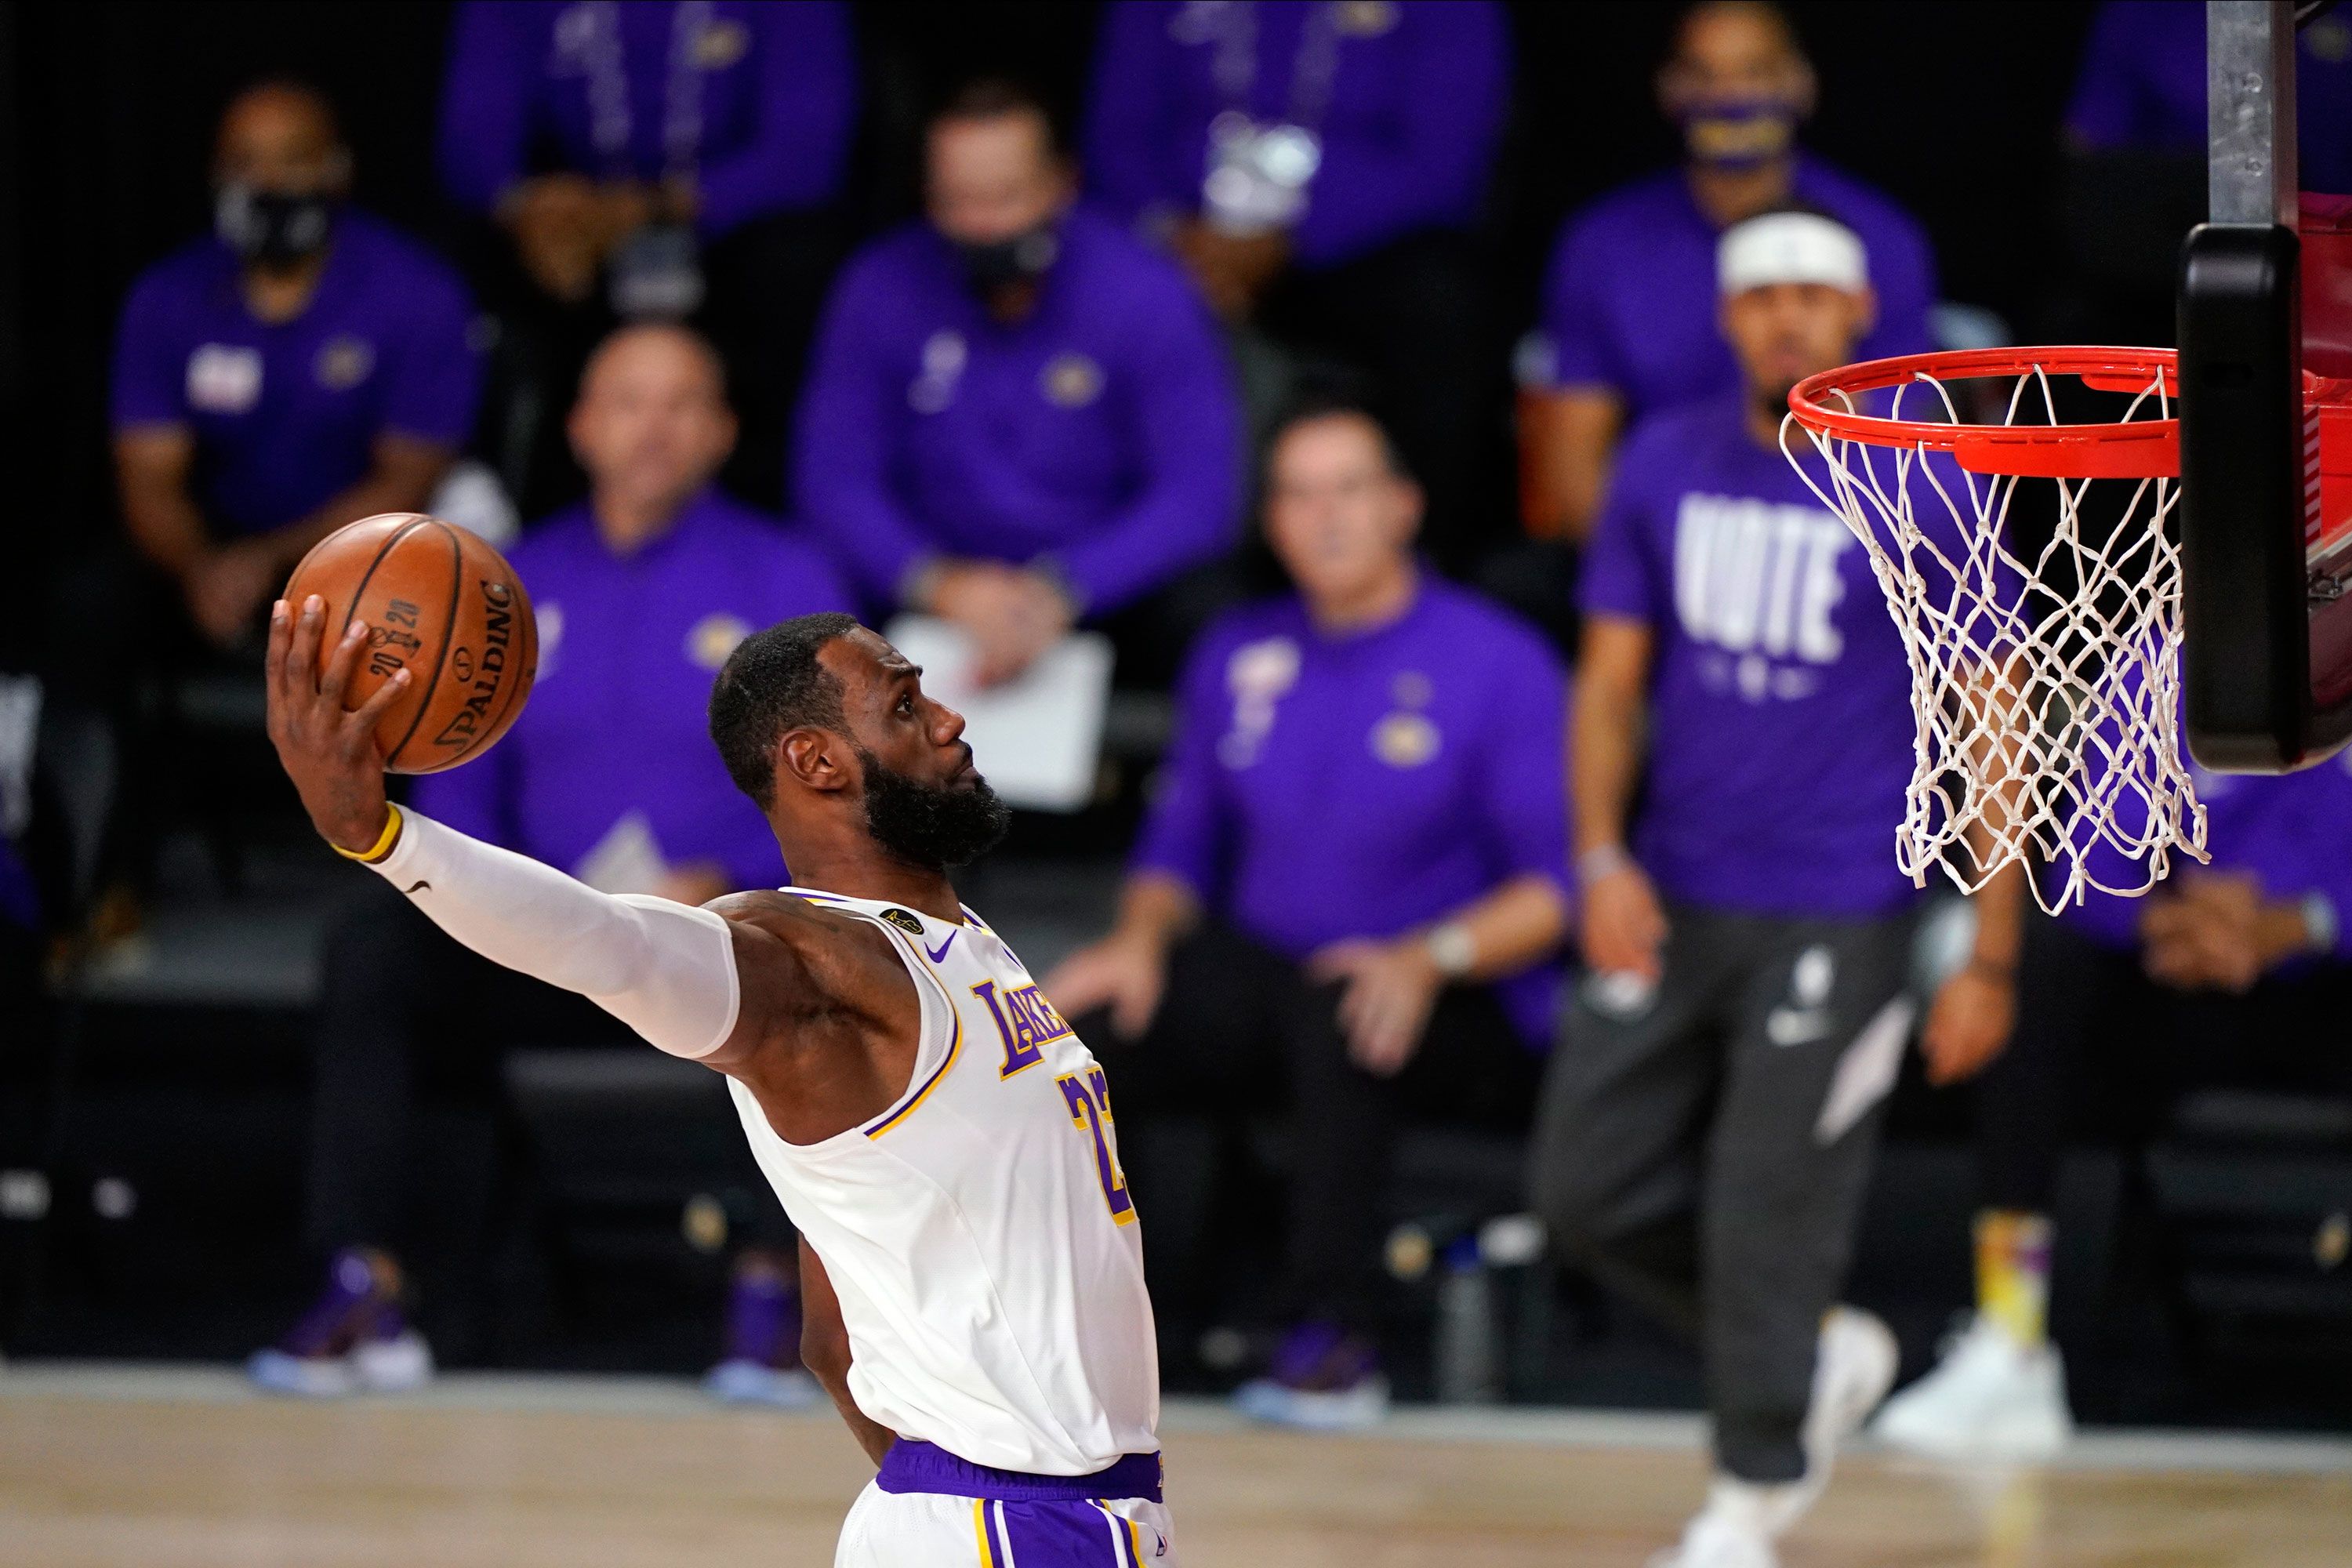 Lakers win record-tying 17th NBA title, giving LeBron James his